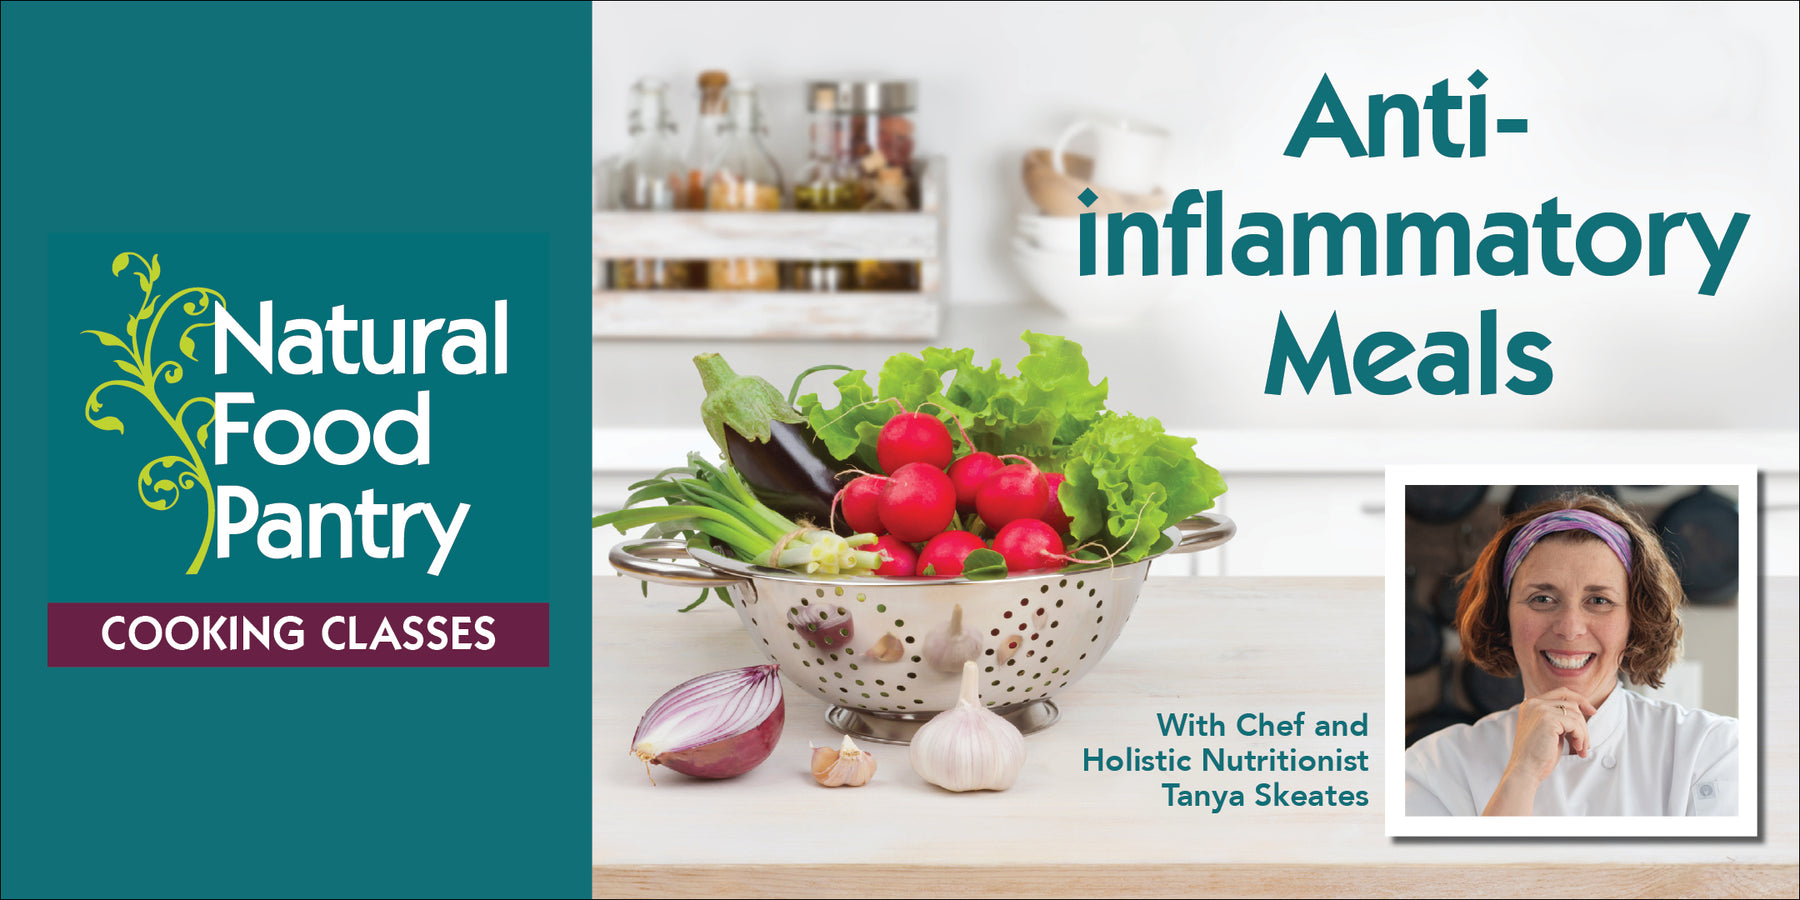 Oct 11: NFP Cooking Class: Anti-inflammatory Meals